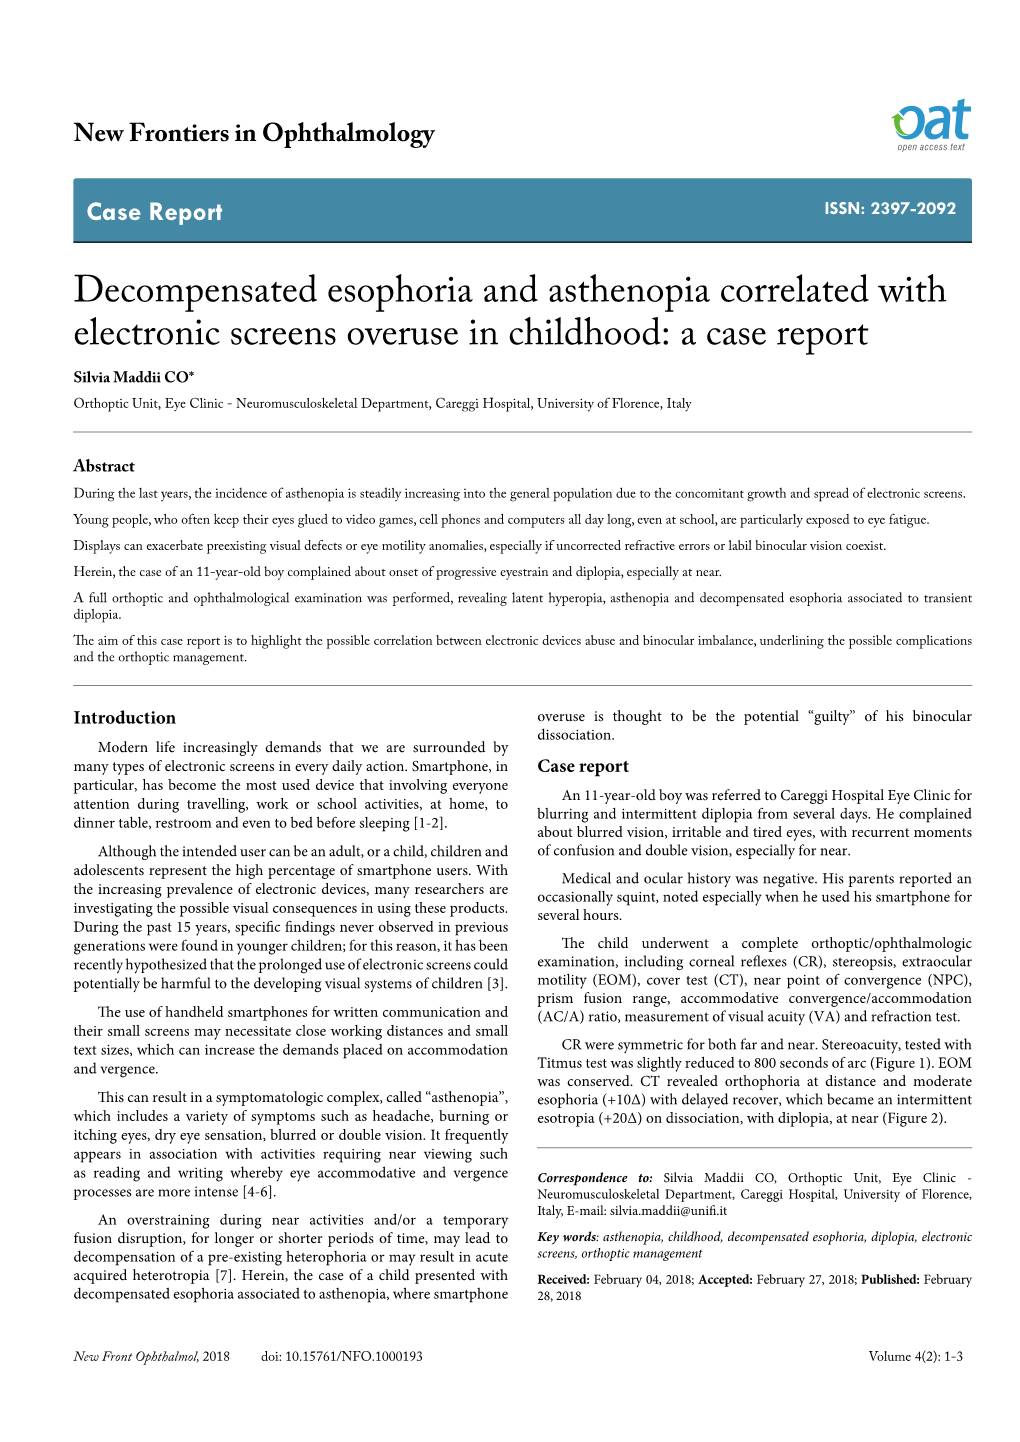 Decompensated Esophoria and Asthenopia